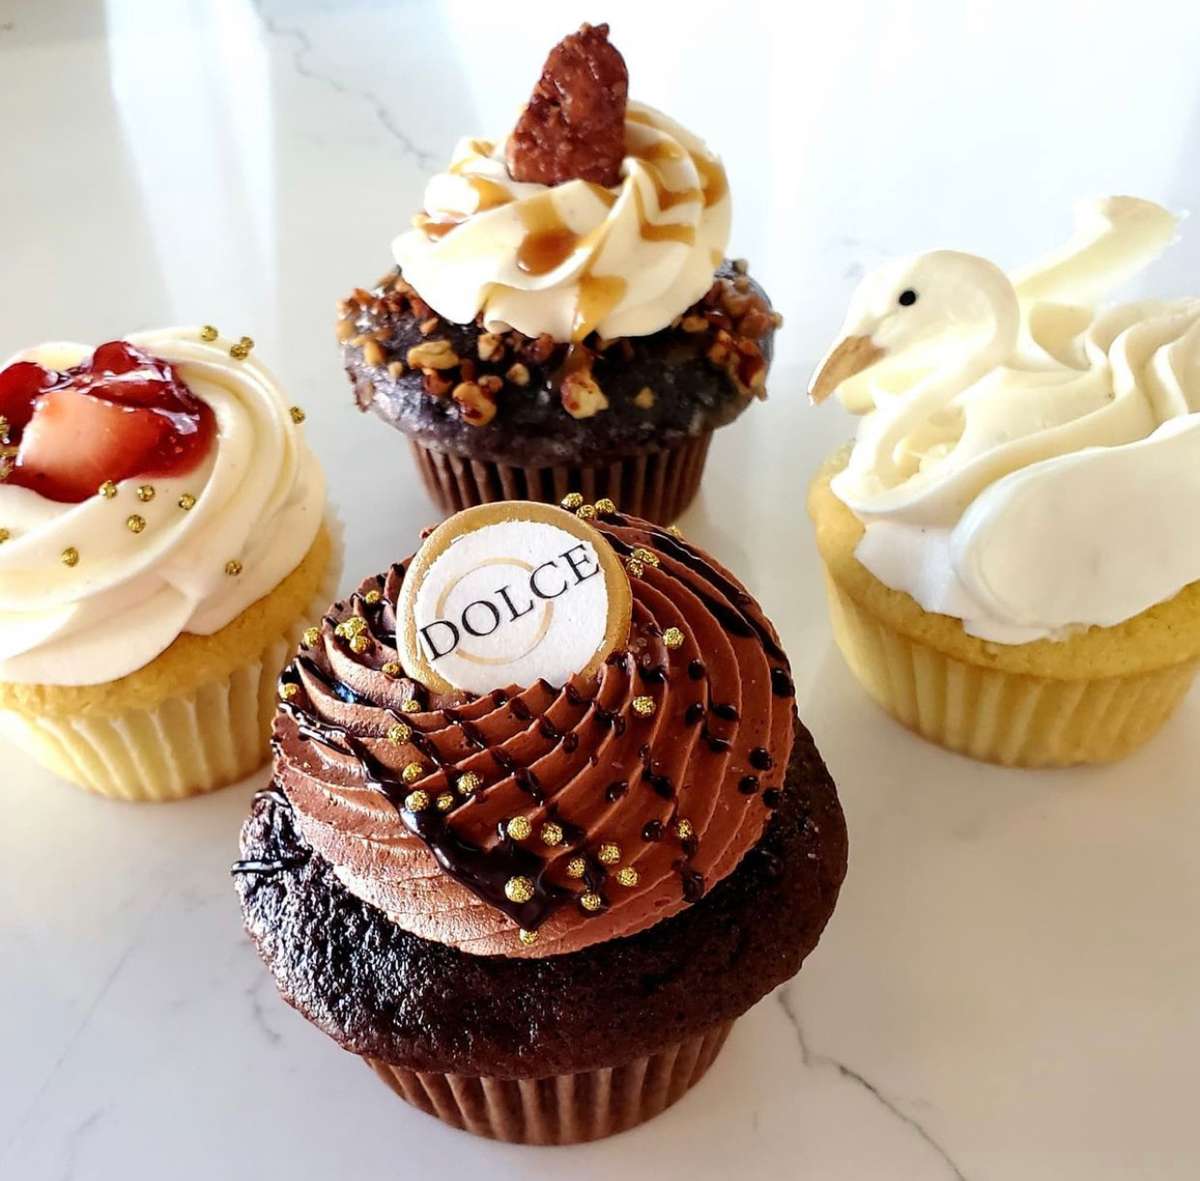 Variety of Dolce cupcakes